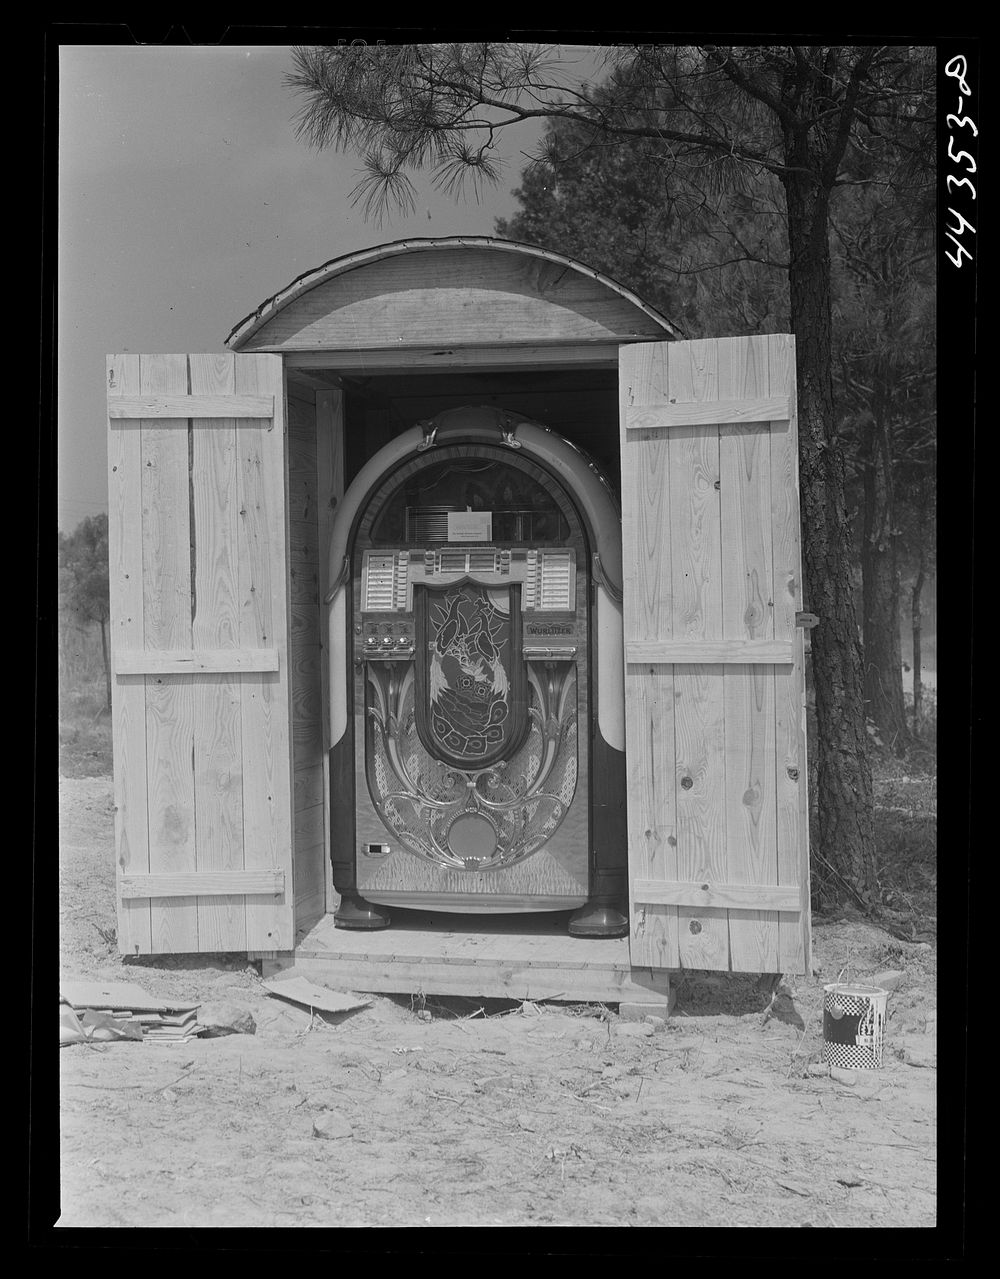 A juke box in a trailer park in Childersburg, Alabama. Sourced from the Library of Congress.